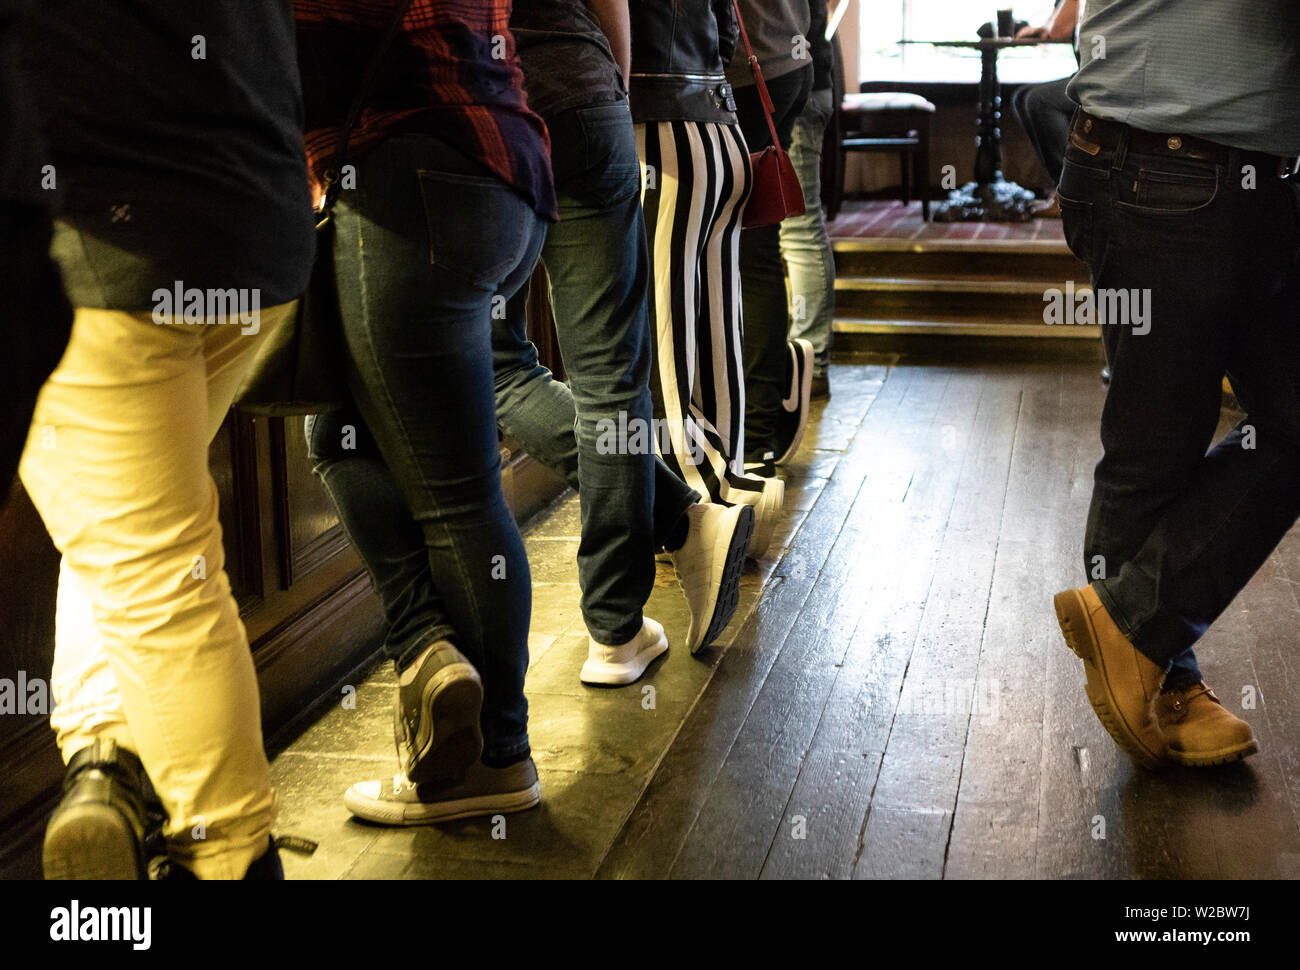 people with cropped legs stand  at a bar counter in a pup with a wooden floor Stock Photo